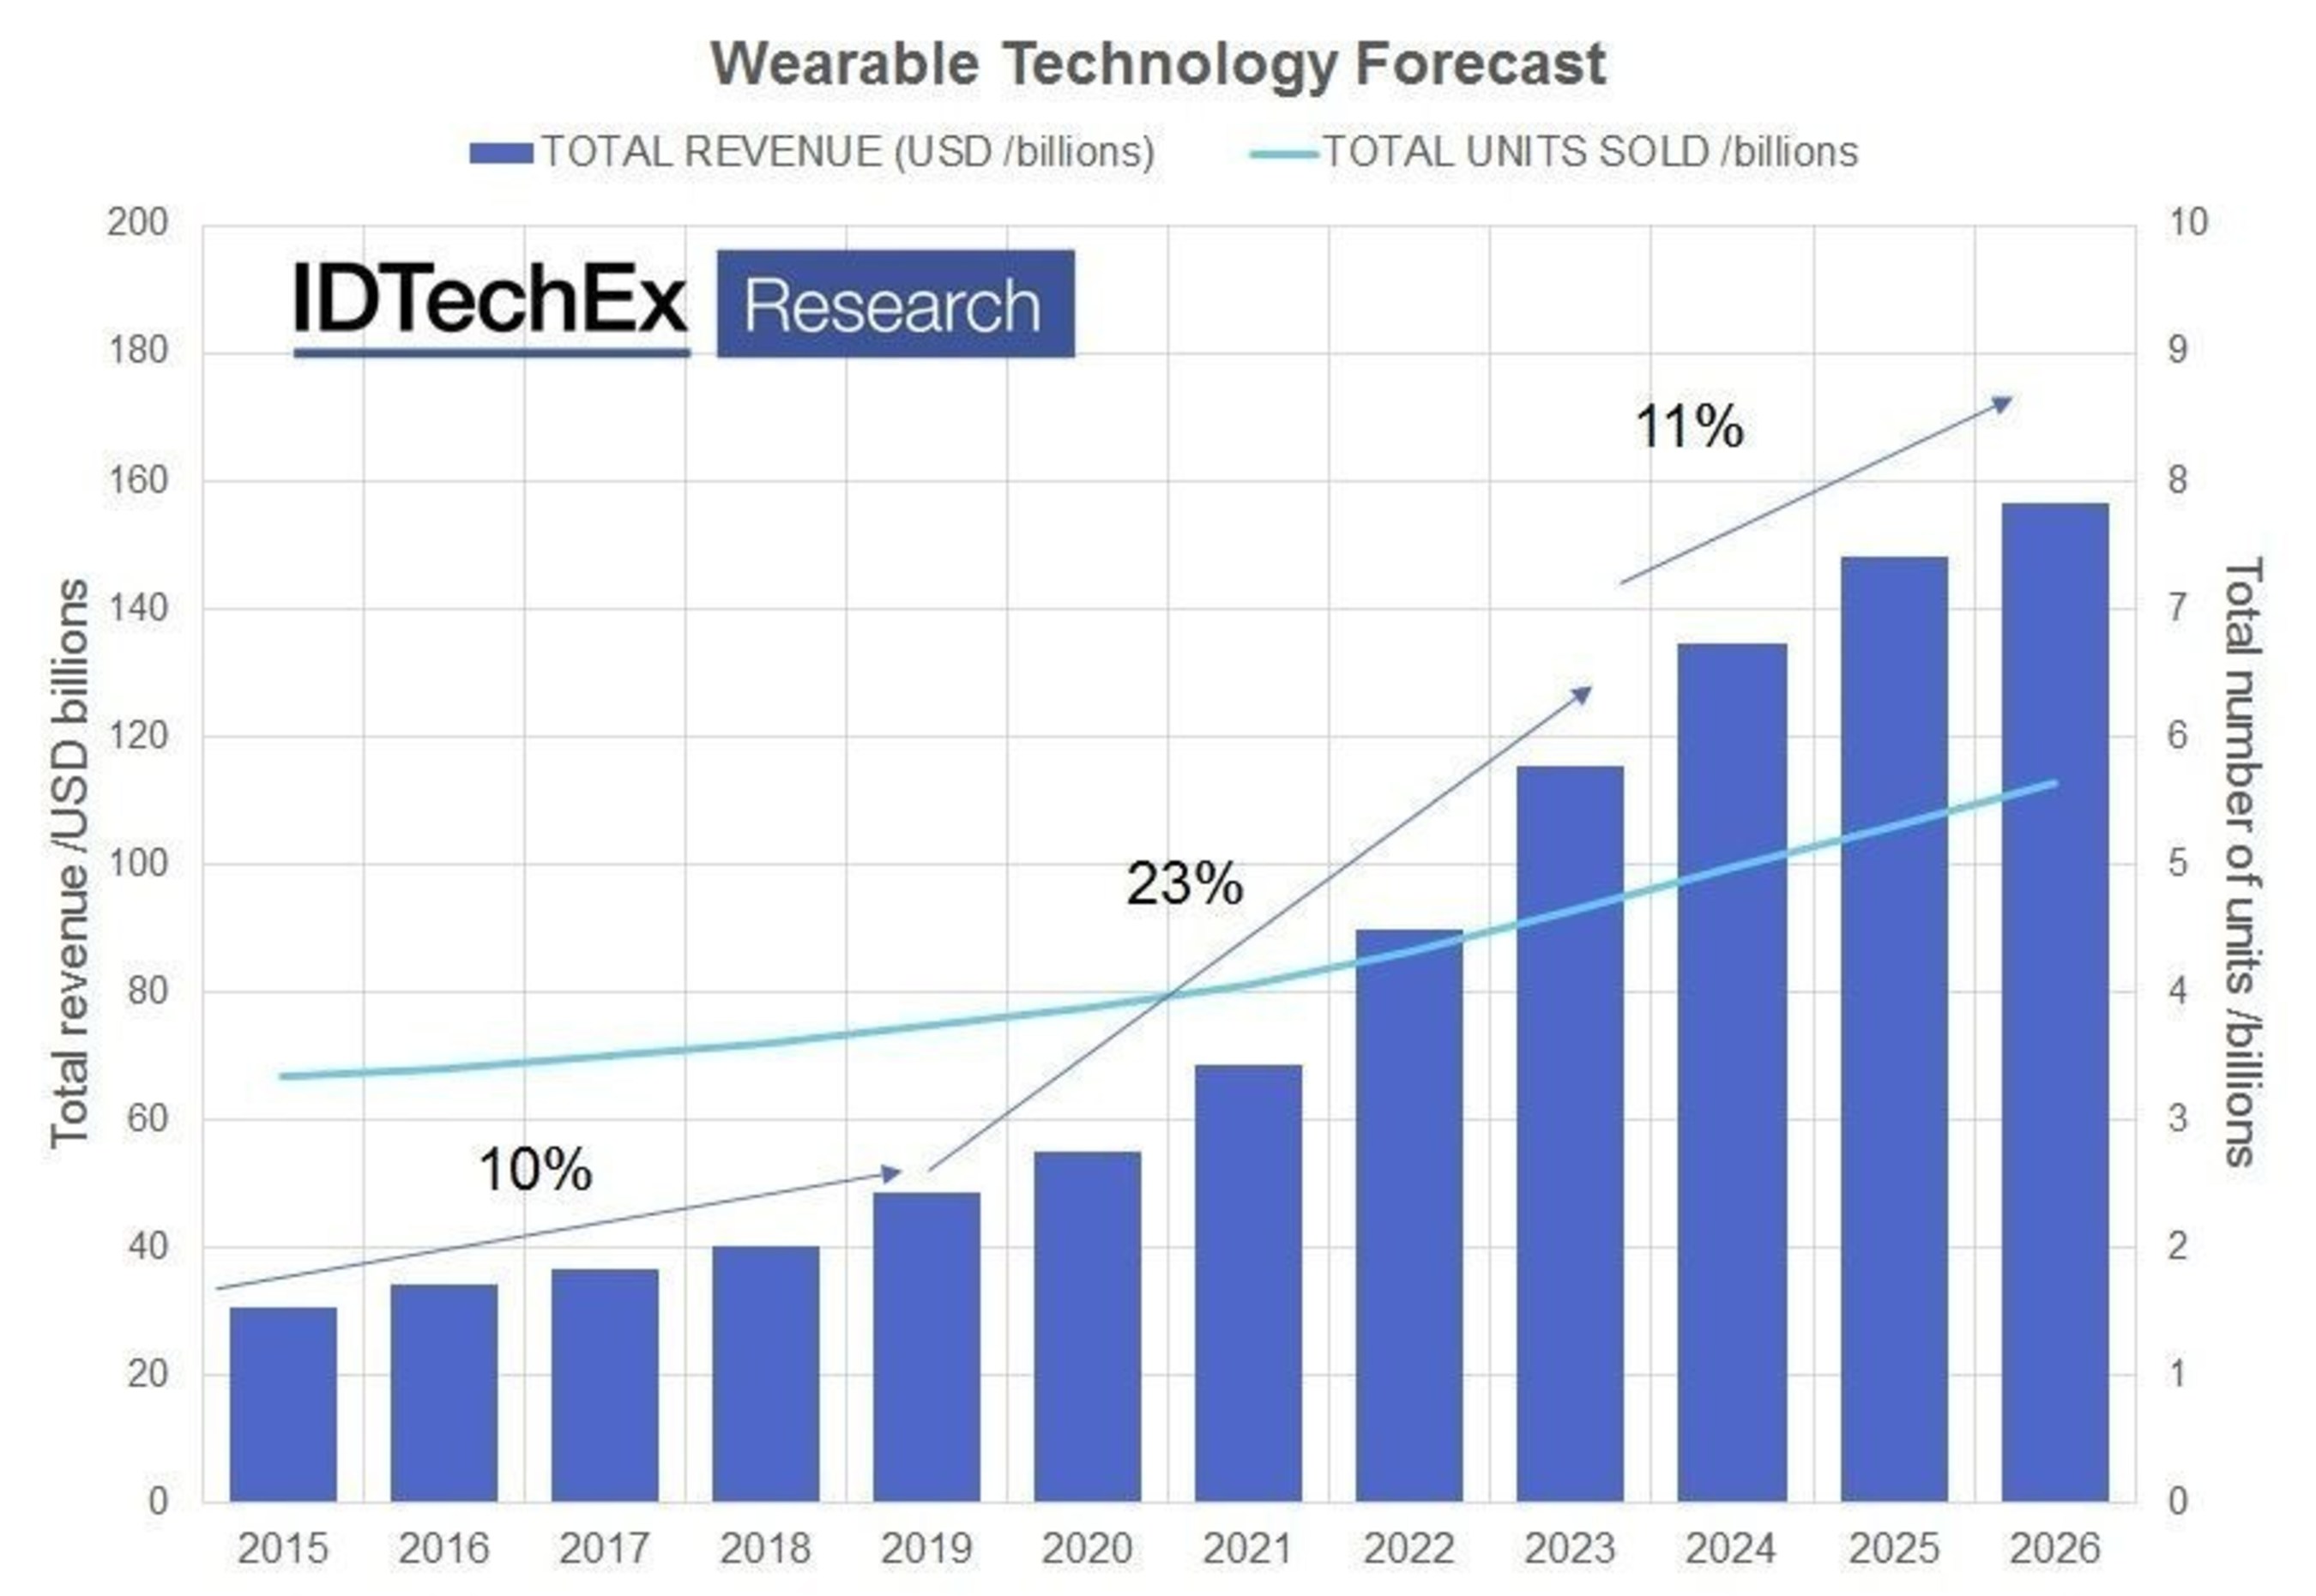 Global wearable technology forecast summary, including 39 forecast lines covering all prominent products today, but also to many incumbent products. Source: IDTechEx Research report Wearable Technology 2016-2026 (www.IDTechEx.com/wearable). (PRNewsFoto/IDTechEx)